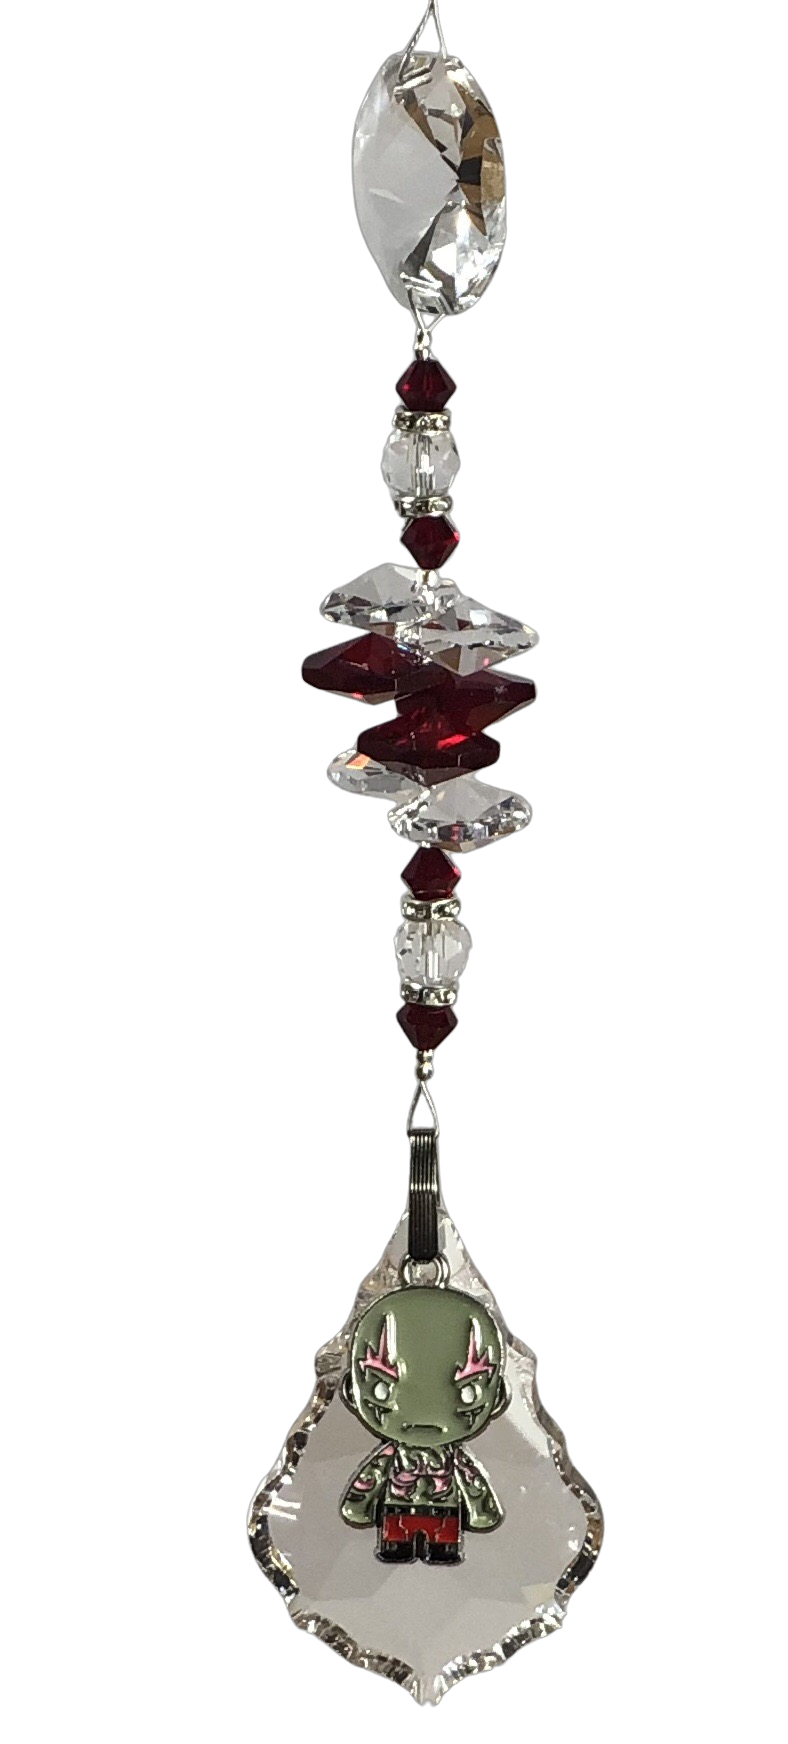 Guardians of the Galaxy - Nebula crystal suncatcher, decorated with 50mm Starburst crystal and garnet gemstone.